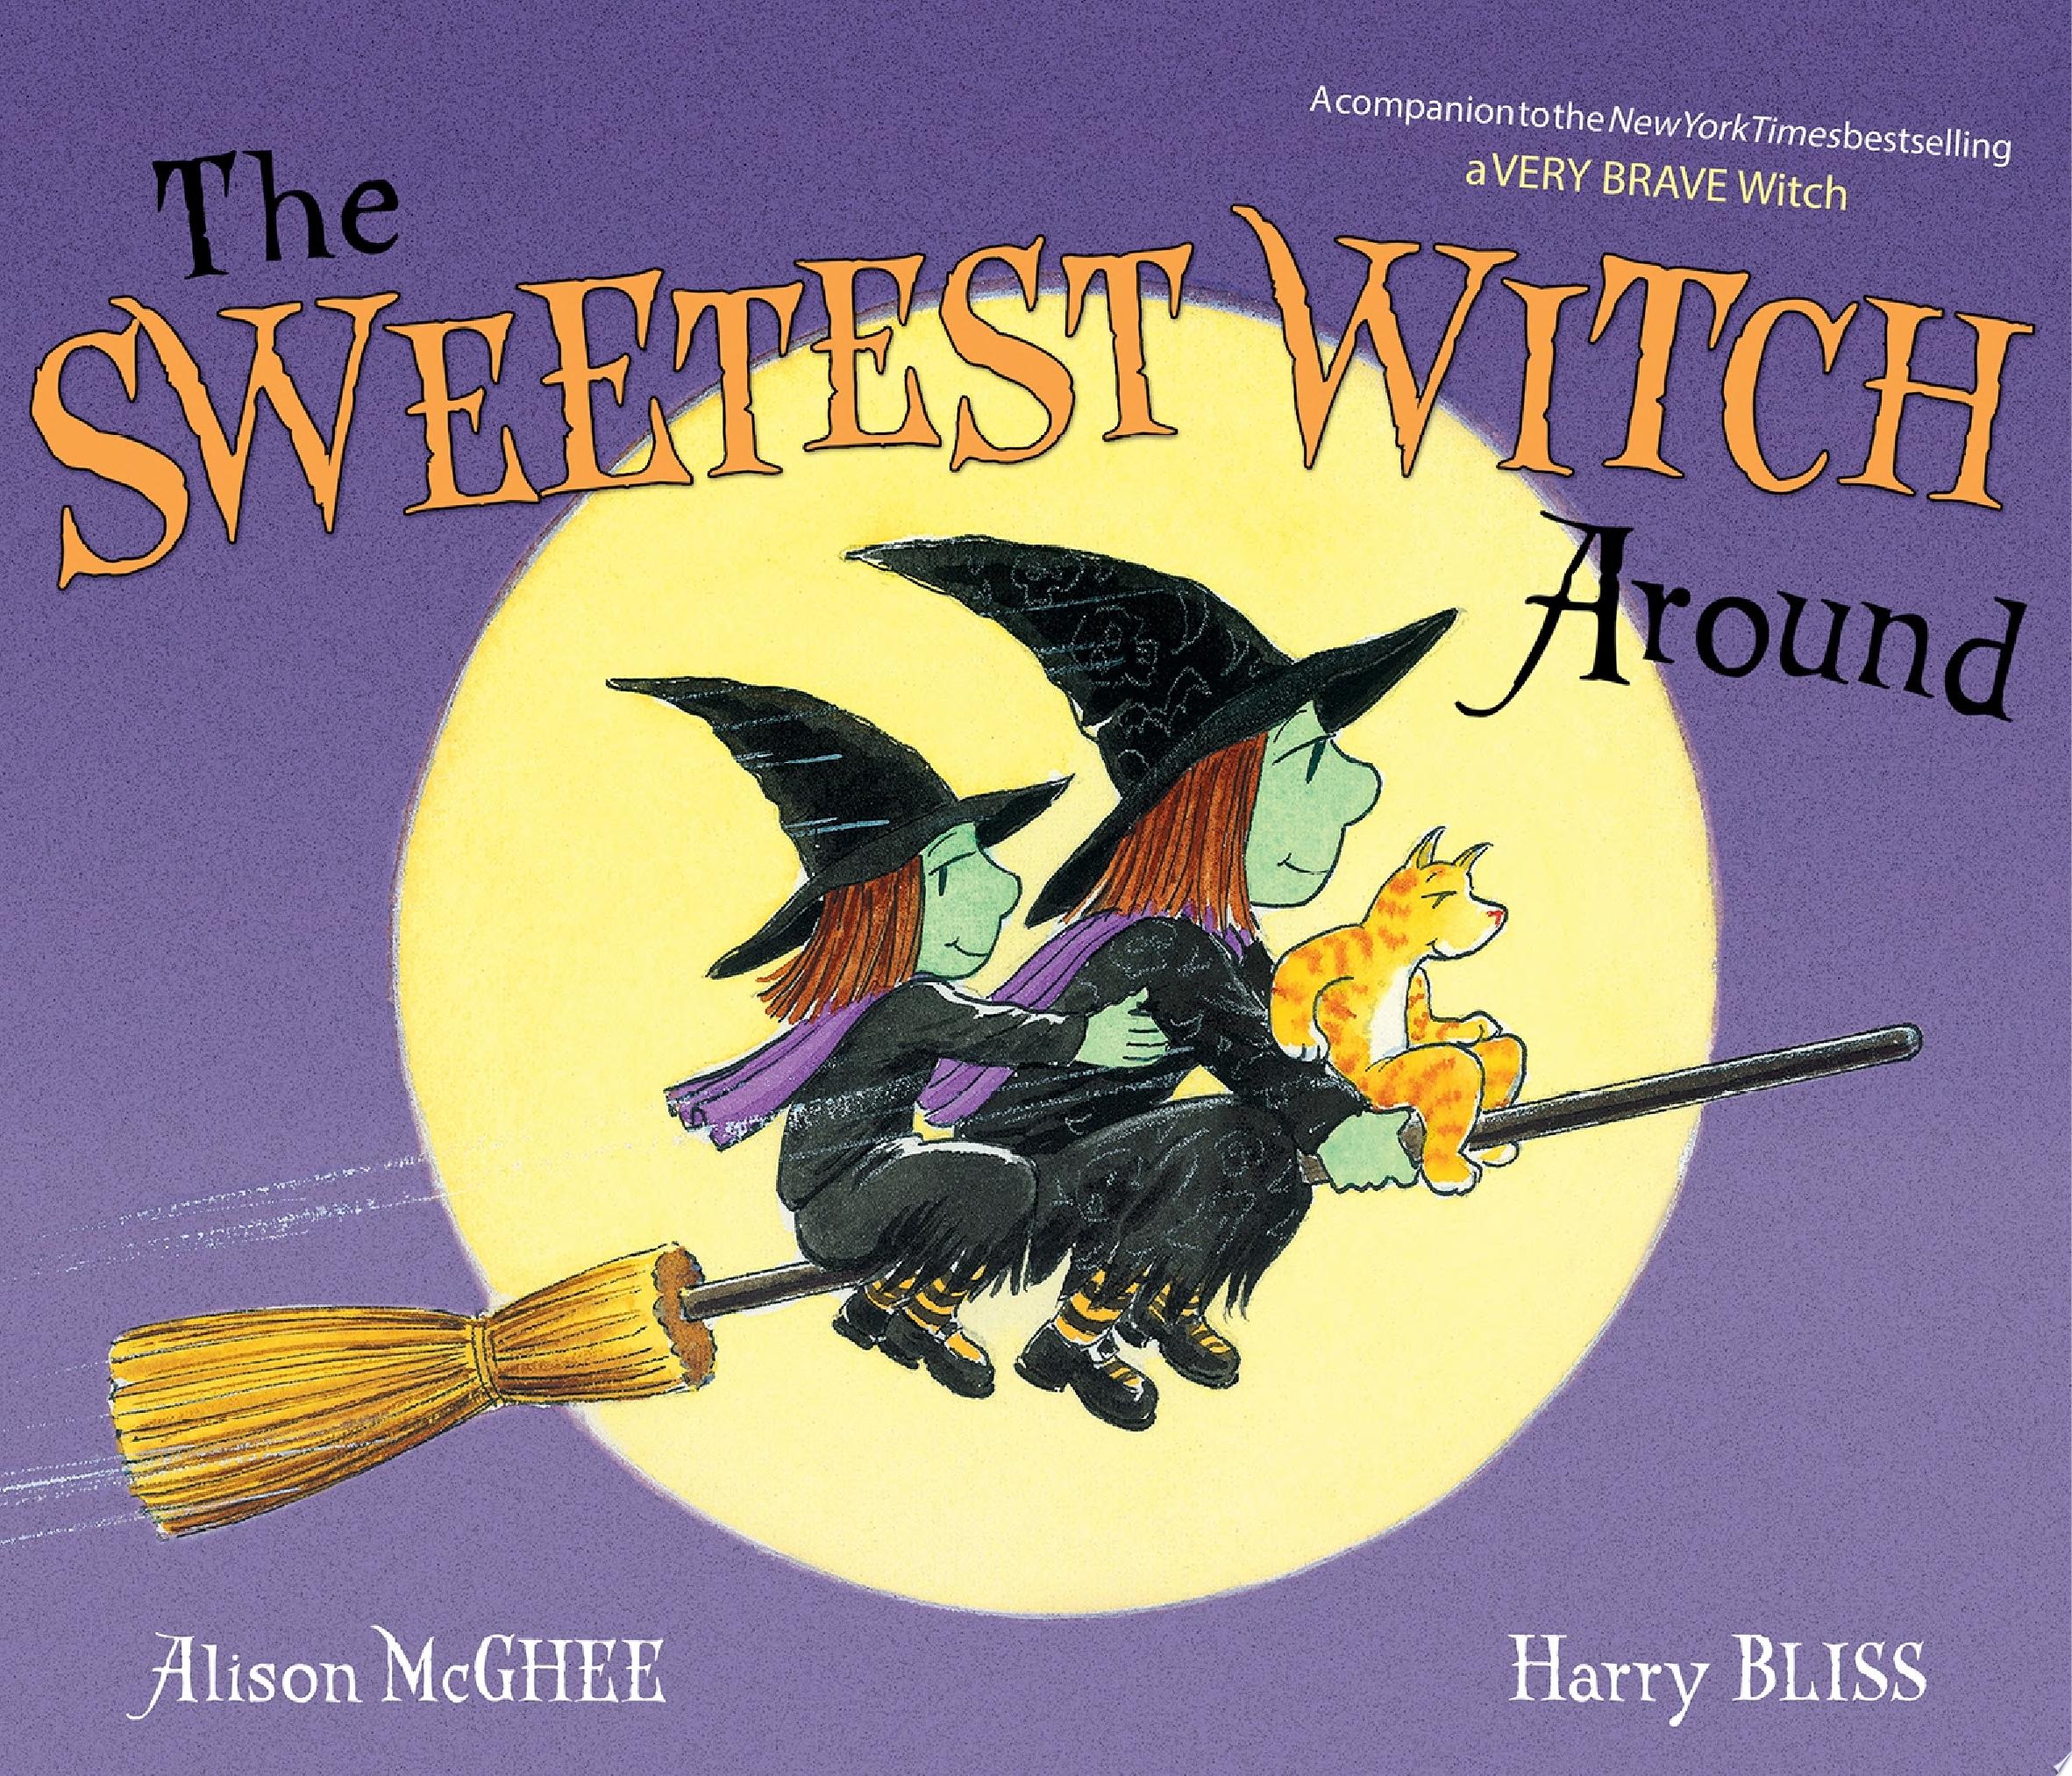 Image for "The Sweetest Witch Around"